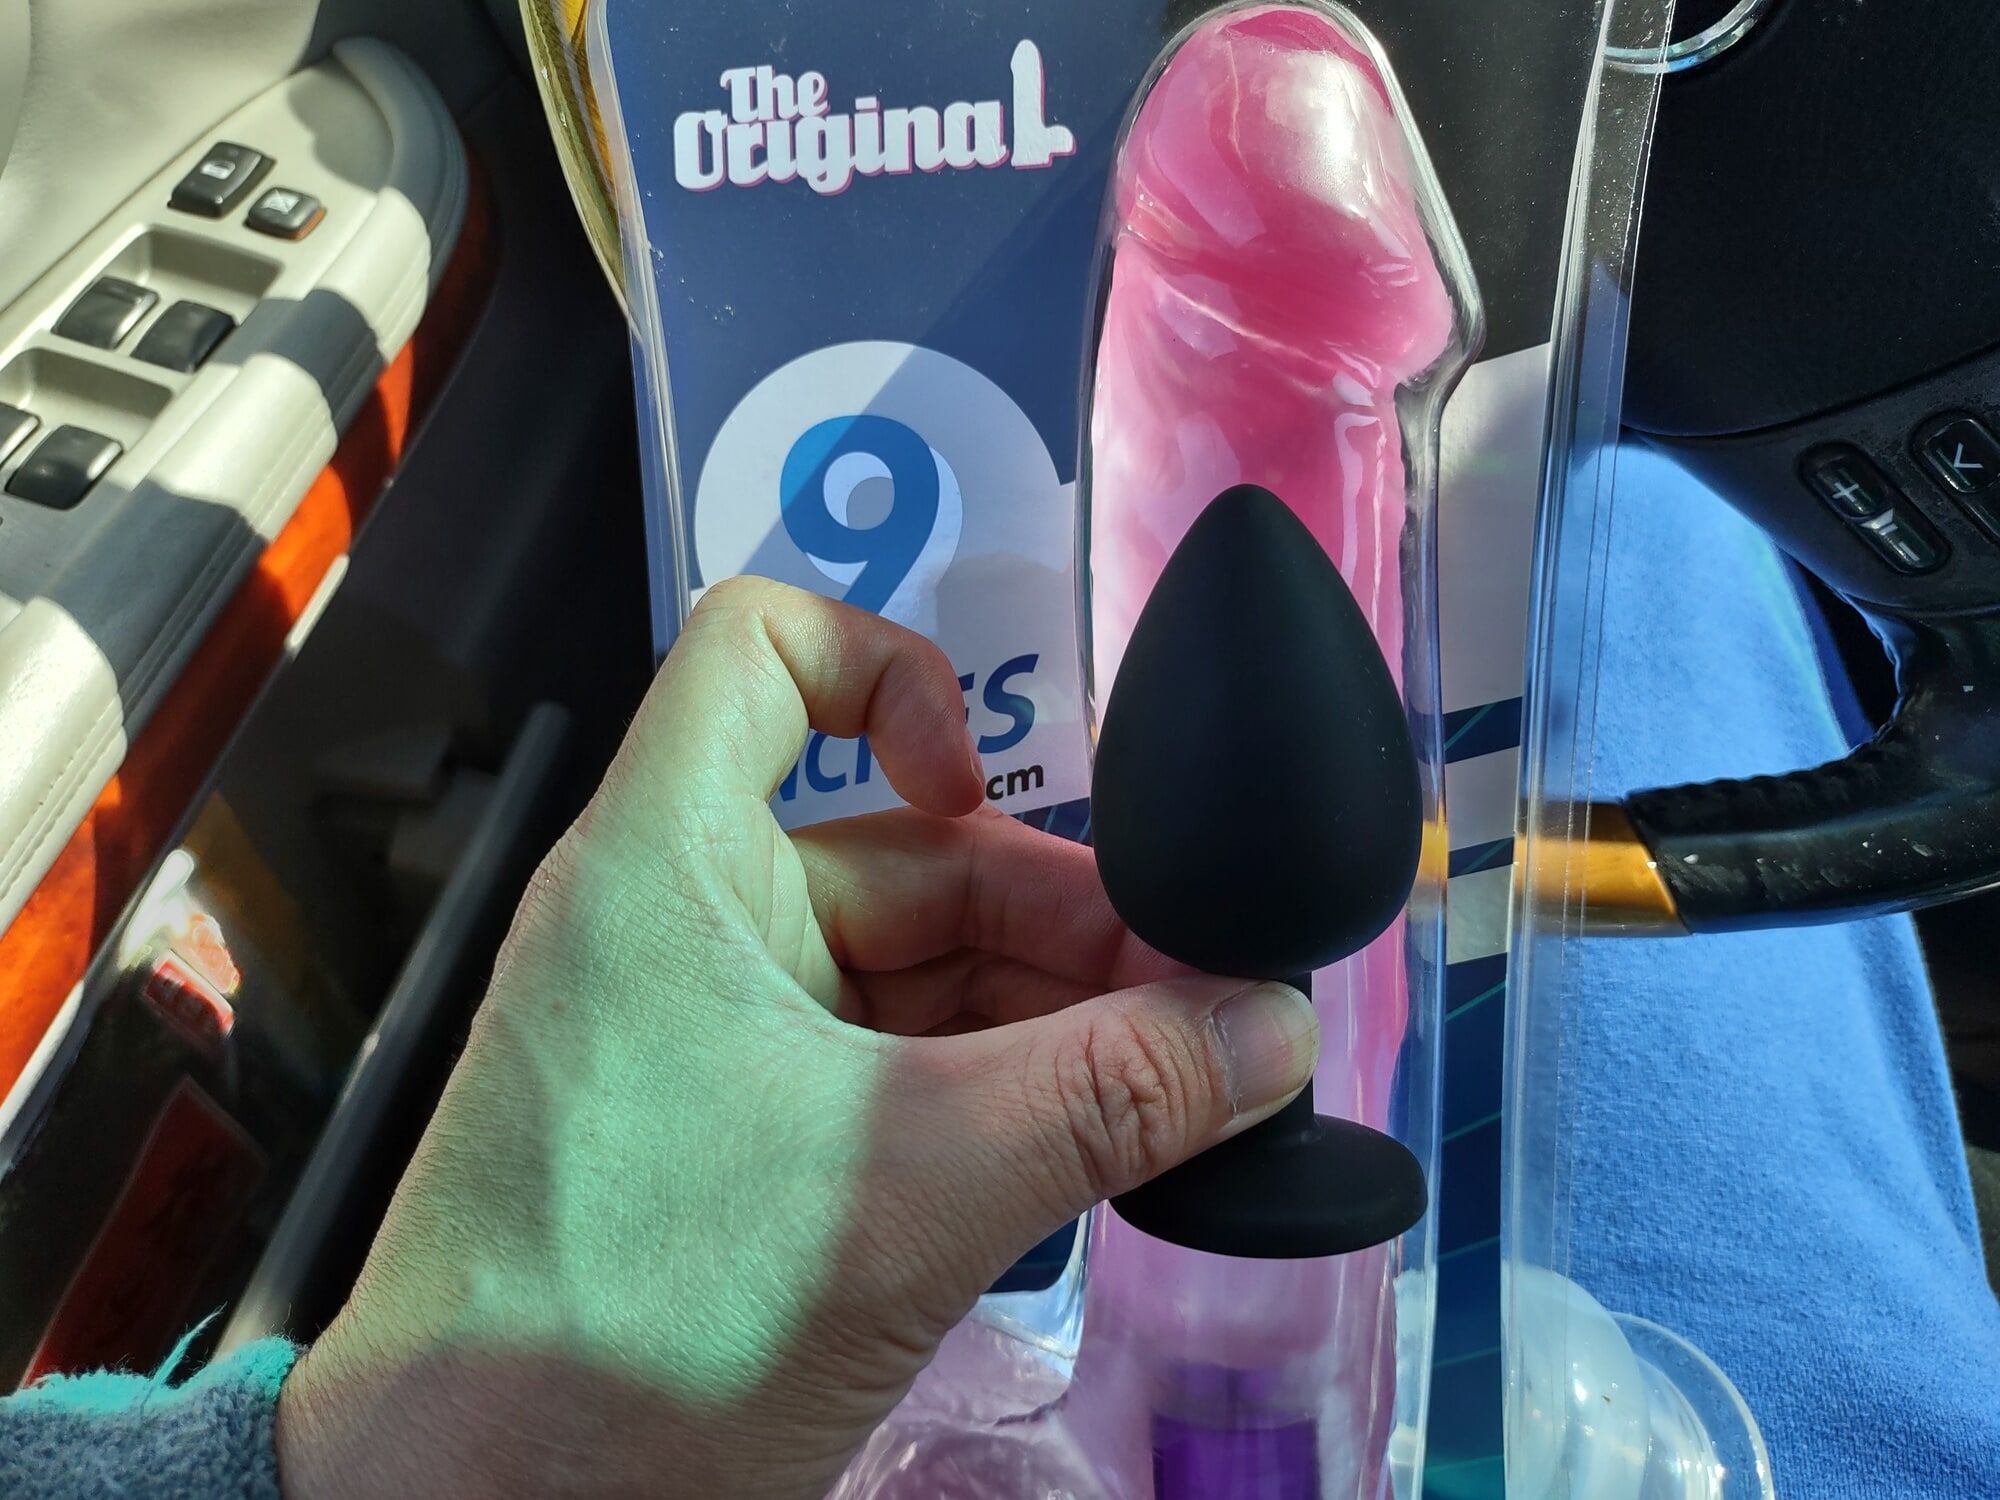 New sex toys. Hollow tubes for inserting and giant dildo #12